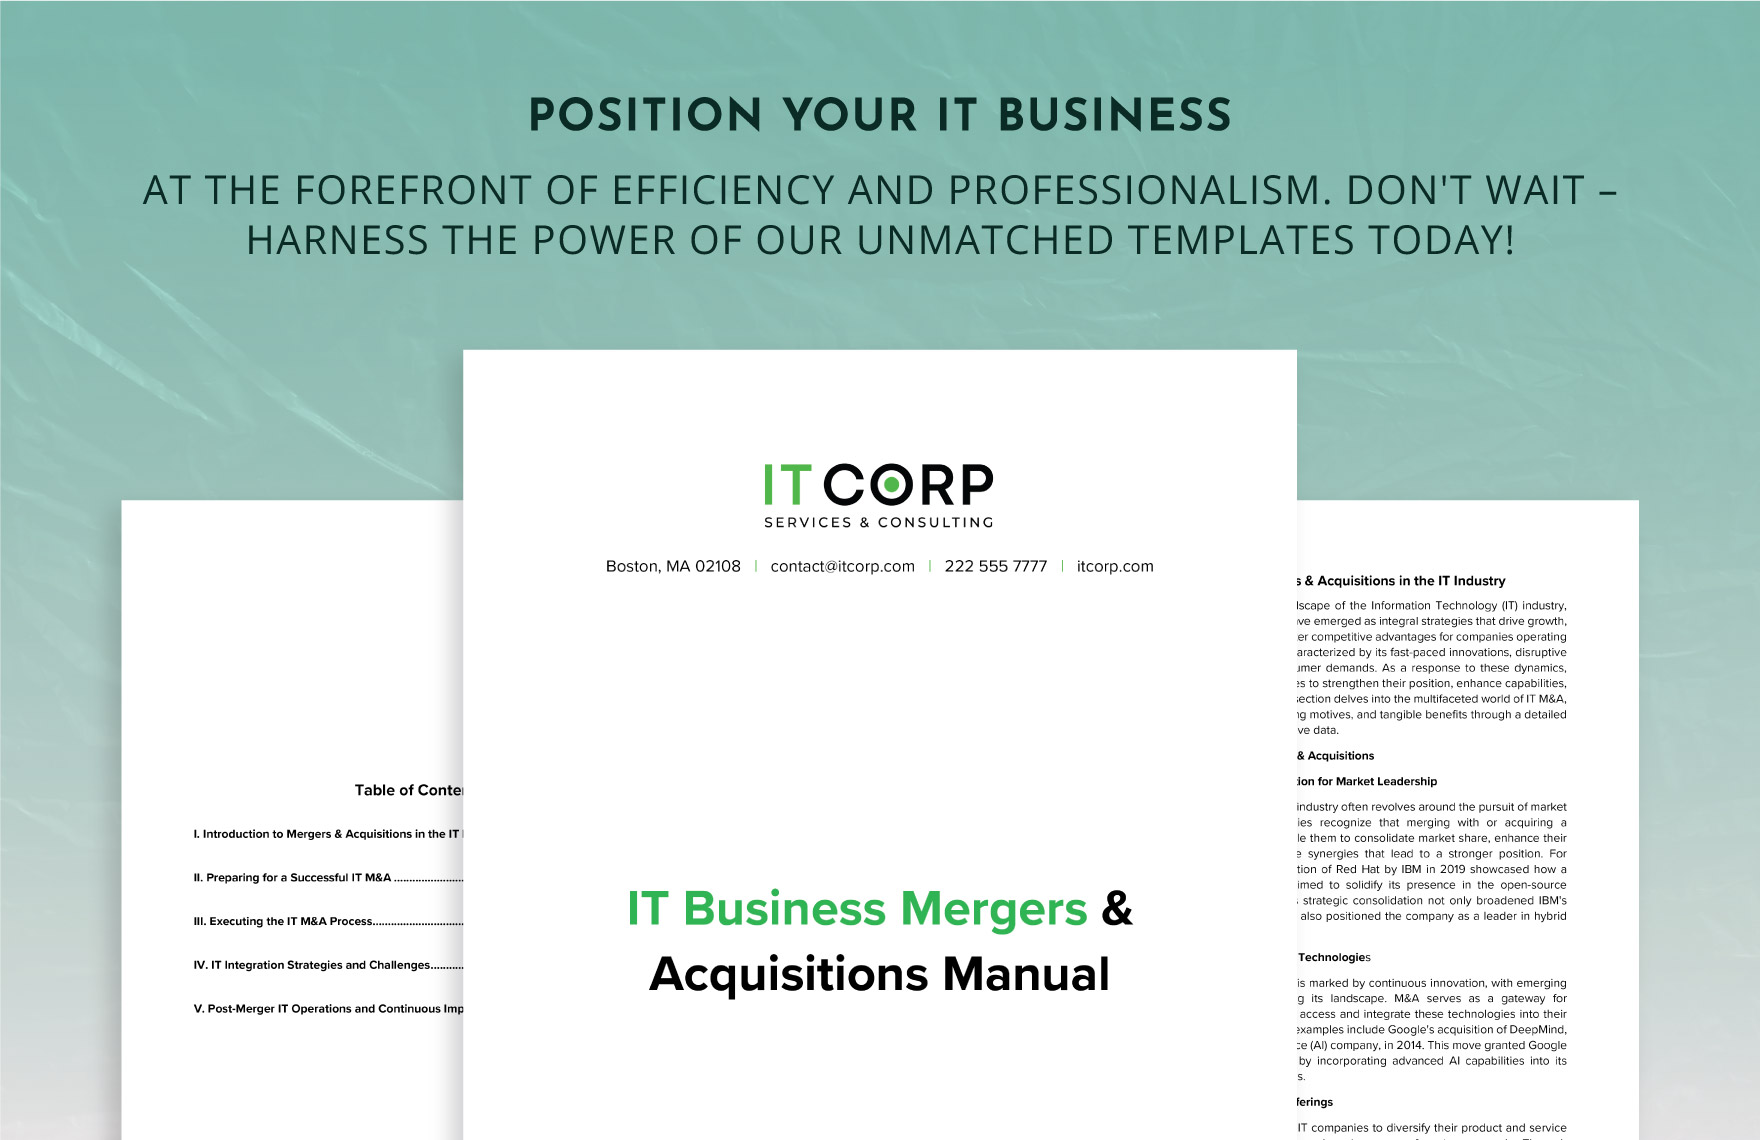 IT Business Mergers & Acquisitions Manual Template